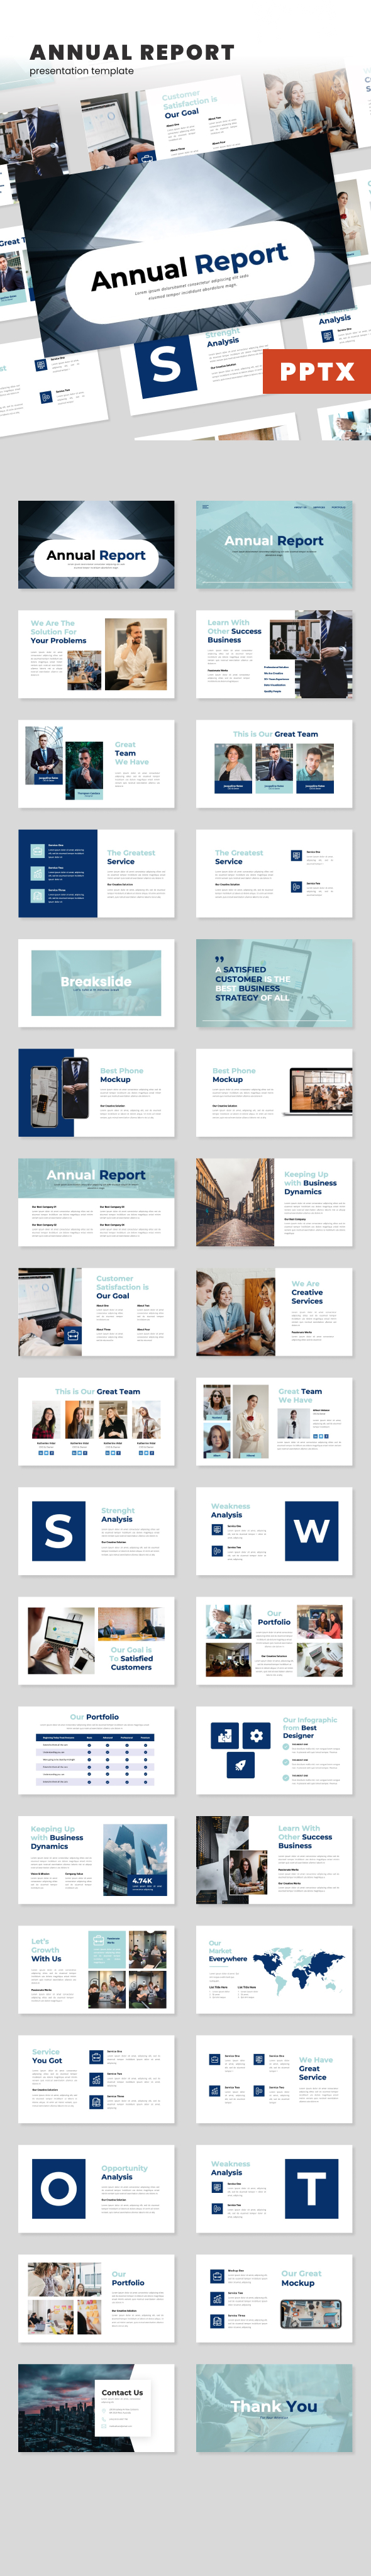 Annual Report - PPT presentation Template